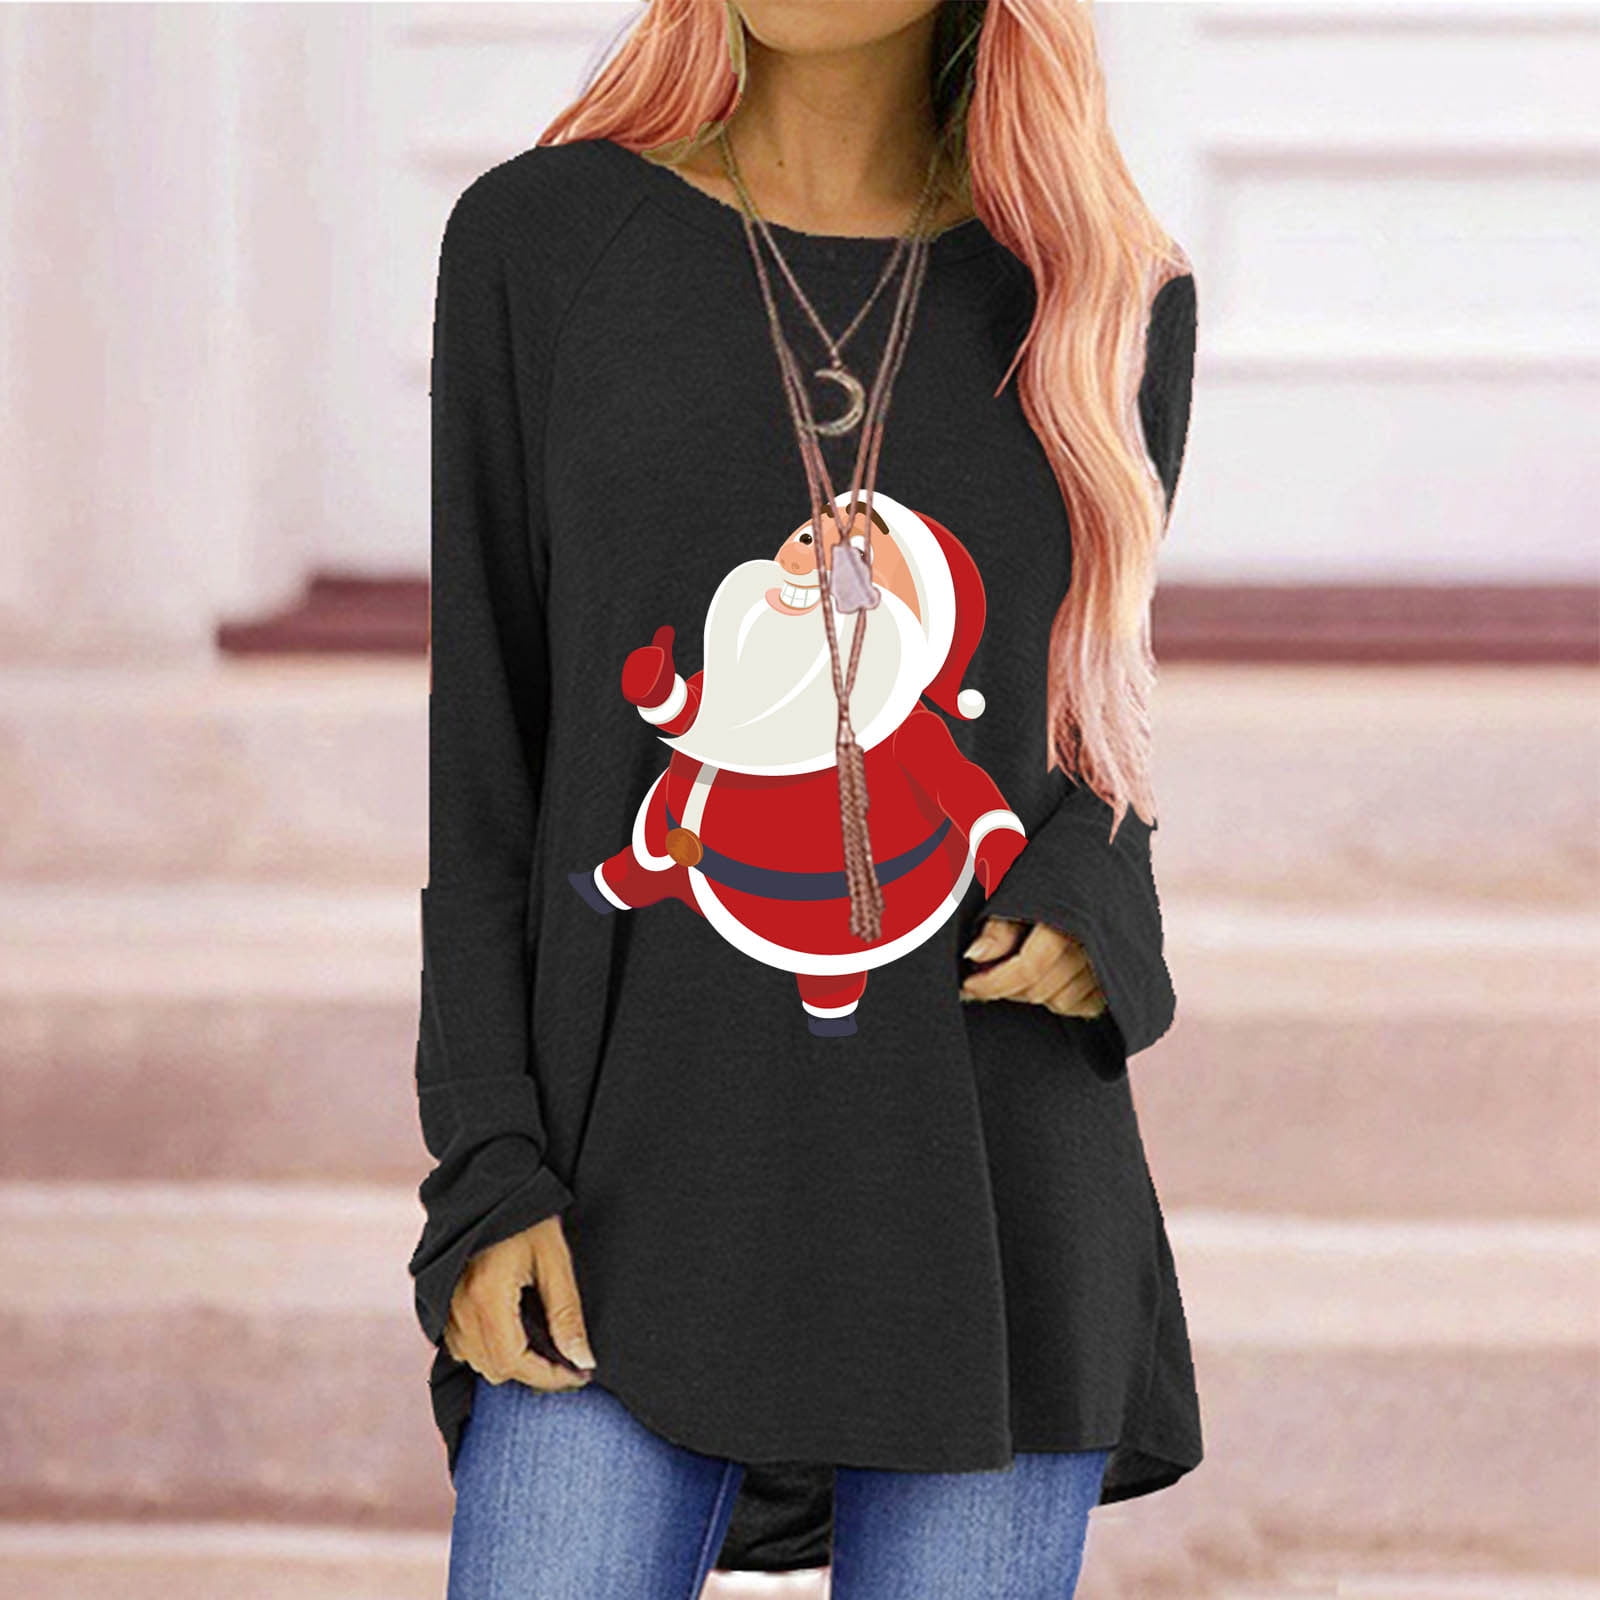 Christmas Hoodie for Women Womens Sweatshirts Crewneck Loose Fitting Tops for Women Long Sleeve Shirts Pullover 